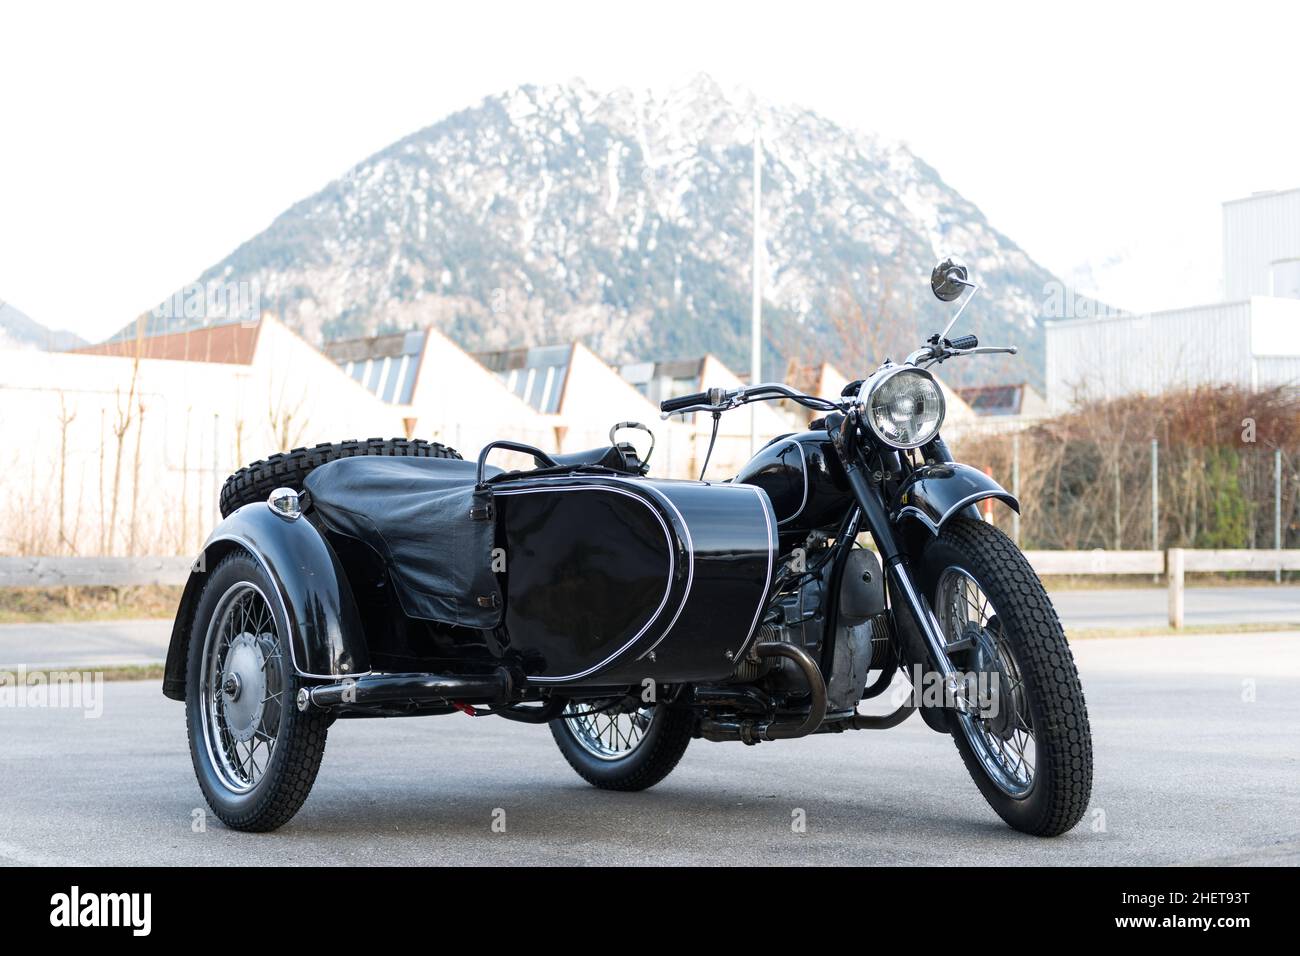 old black oldtimer motorcycle with trailer side car Stock Photo